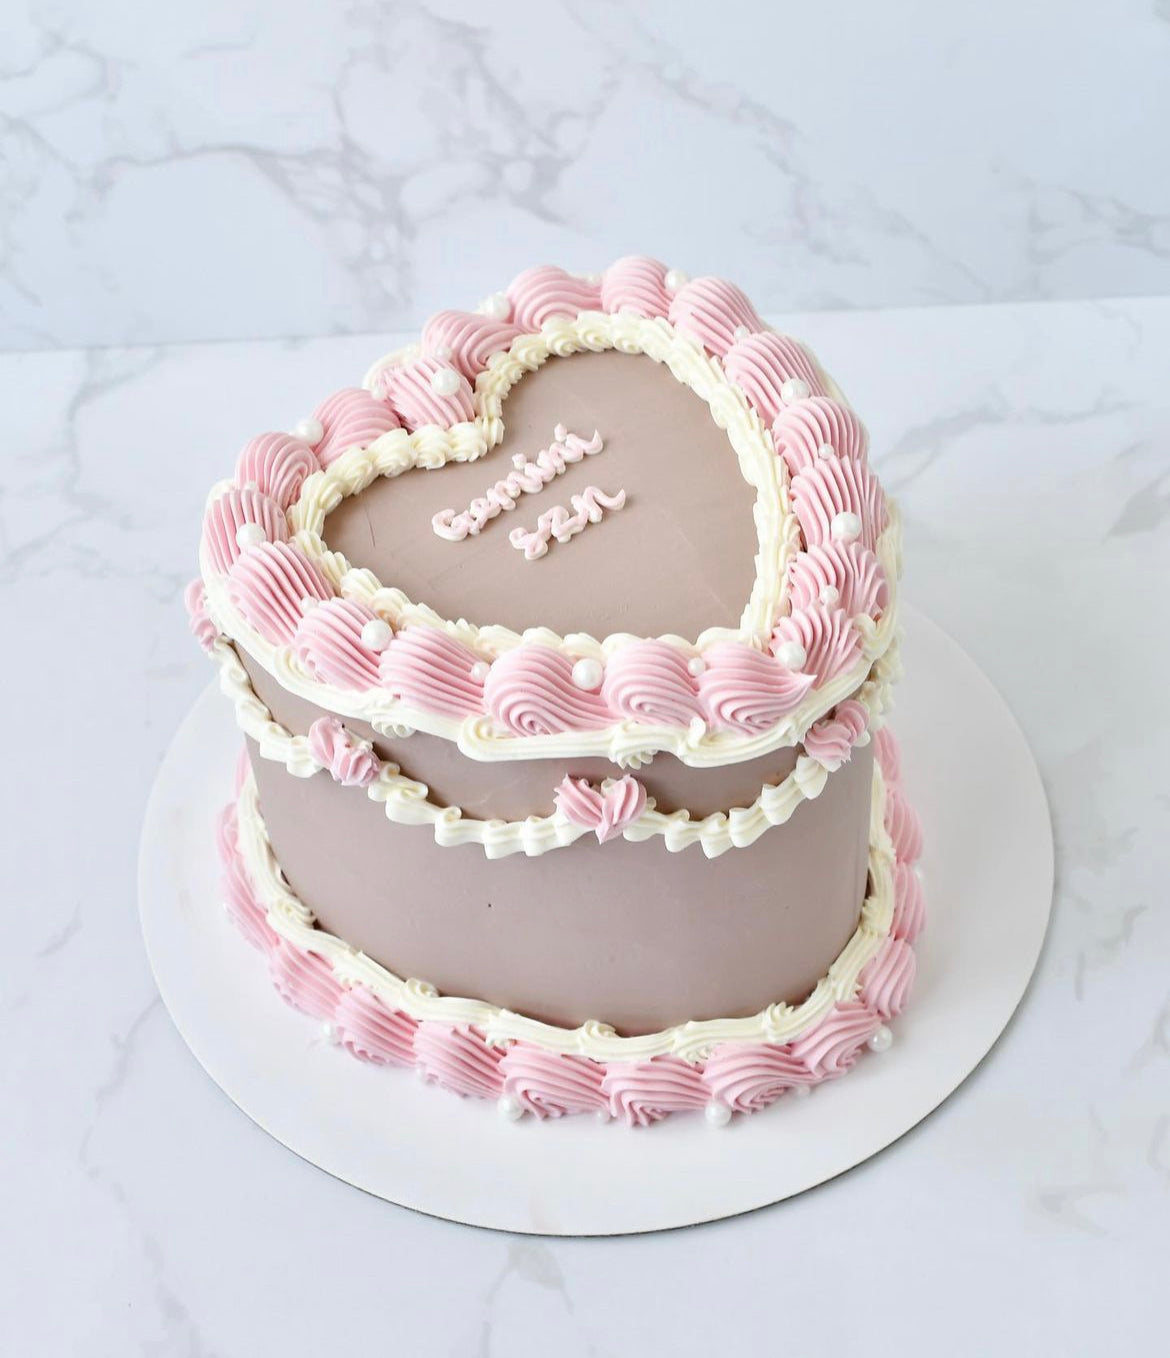 edited by ☁️thi☁️ | Simple birthday cake, Pretty birthday cakes, Cake  designs birthday